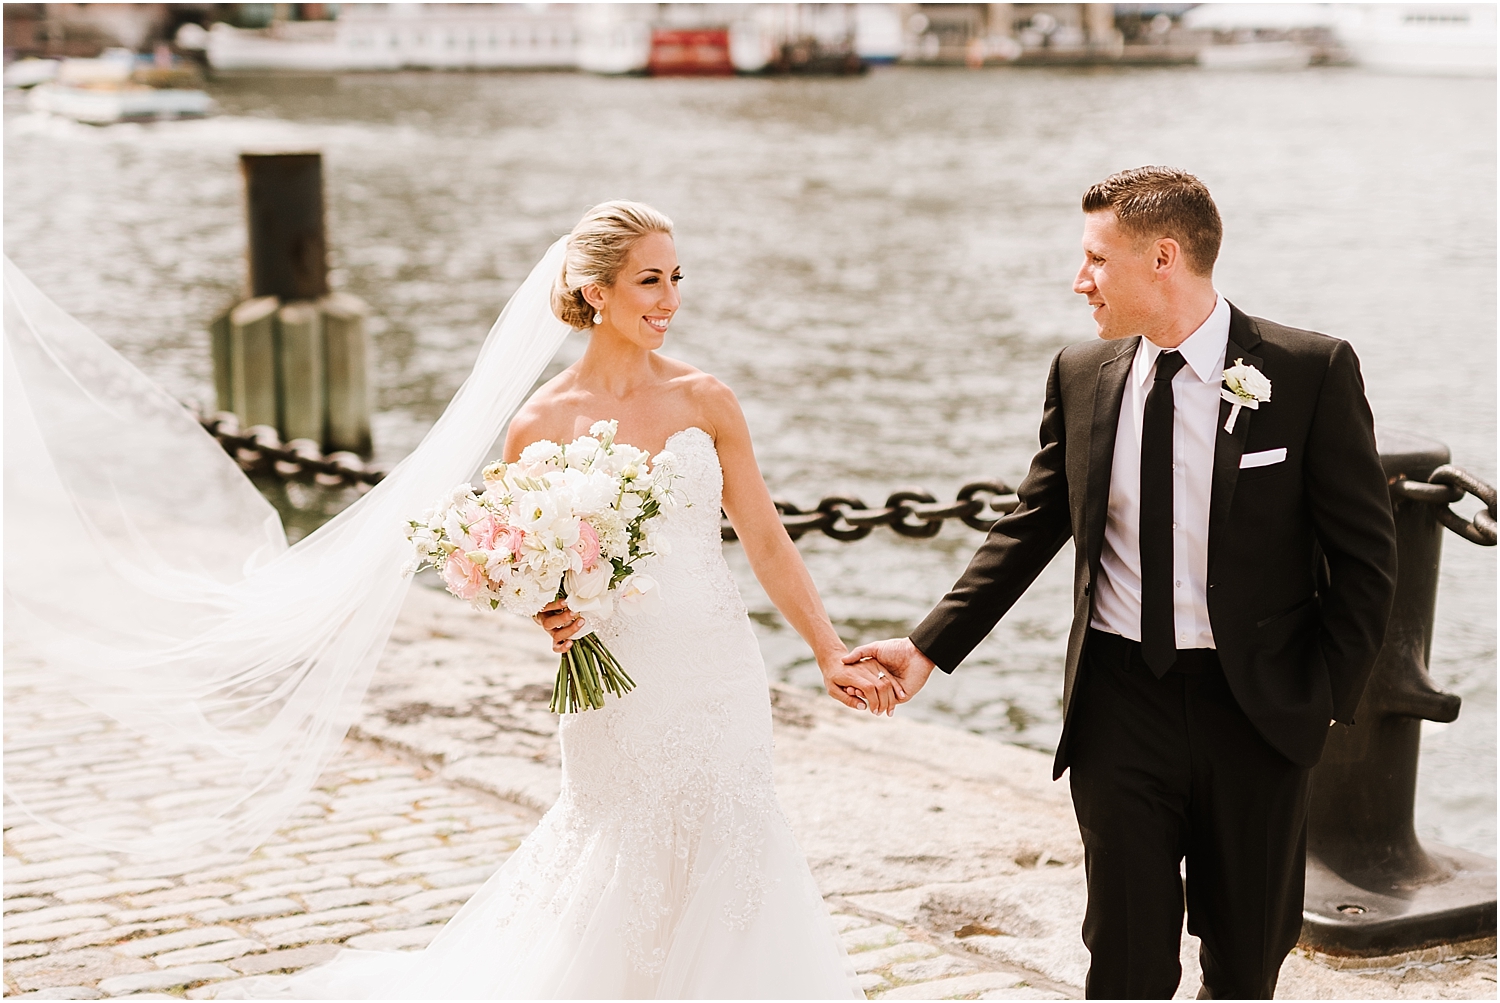 Classic Summer Wedding at the Seaport Hotel by Boston Wedding Photographer Annmarie Swift